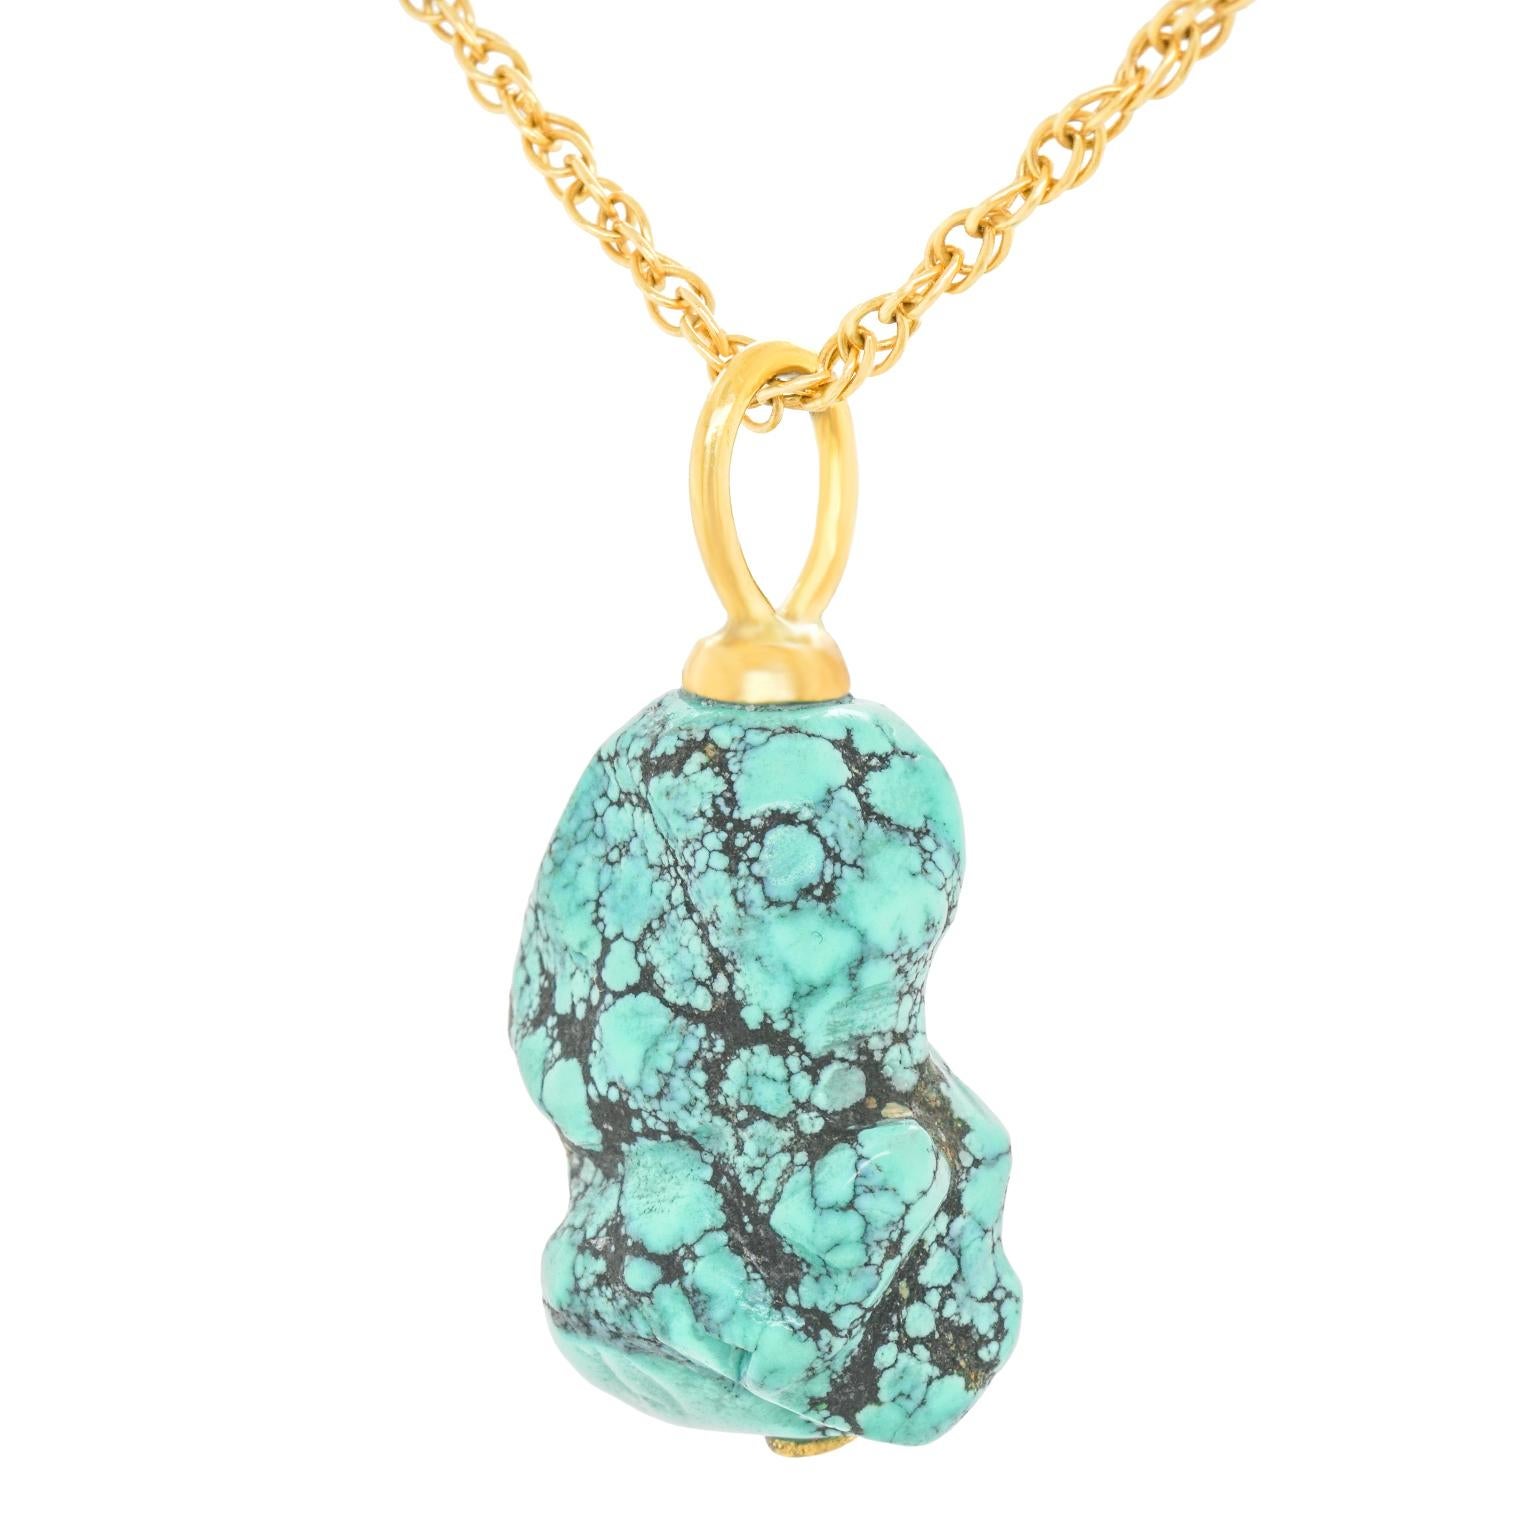 Cabochon Turquoise and Gold Pendant For Sale